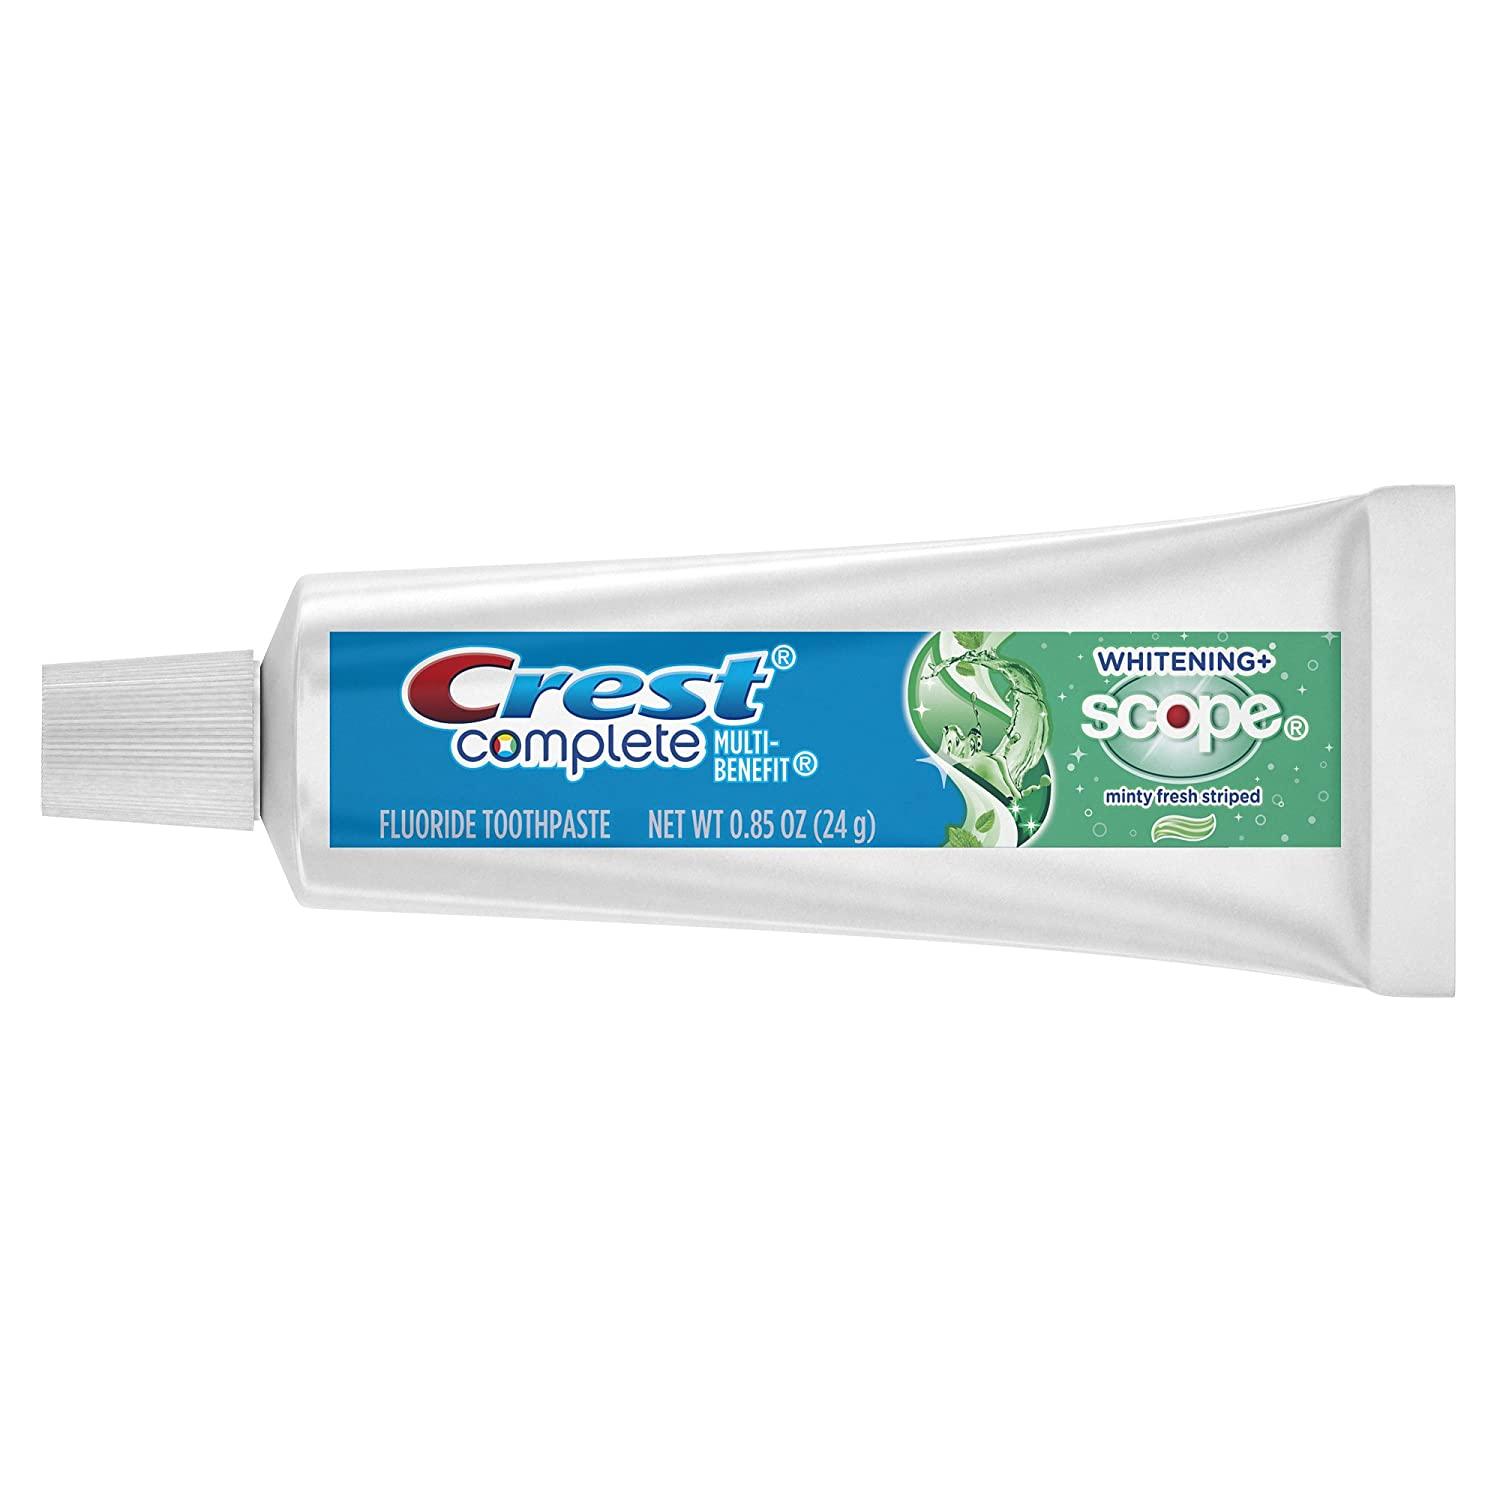 Crest Complete Whitening Plus Scope Minty Fresh Toothpaste, 0.85 Ounce